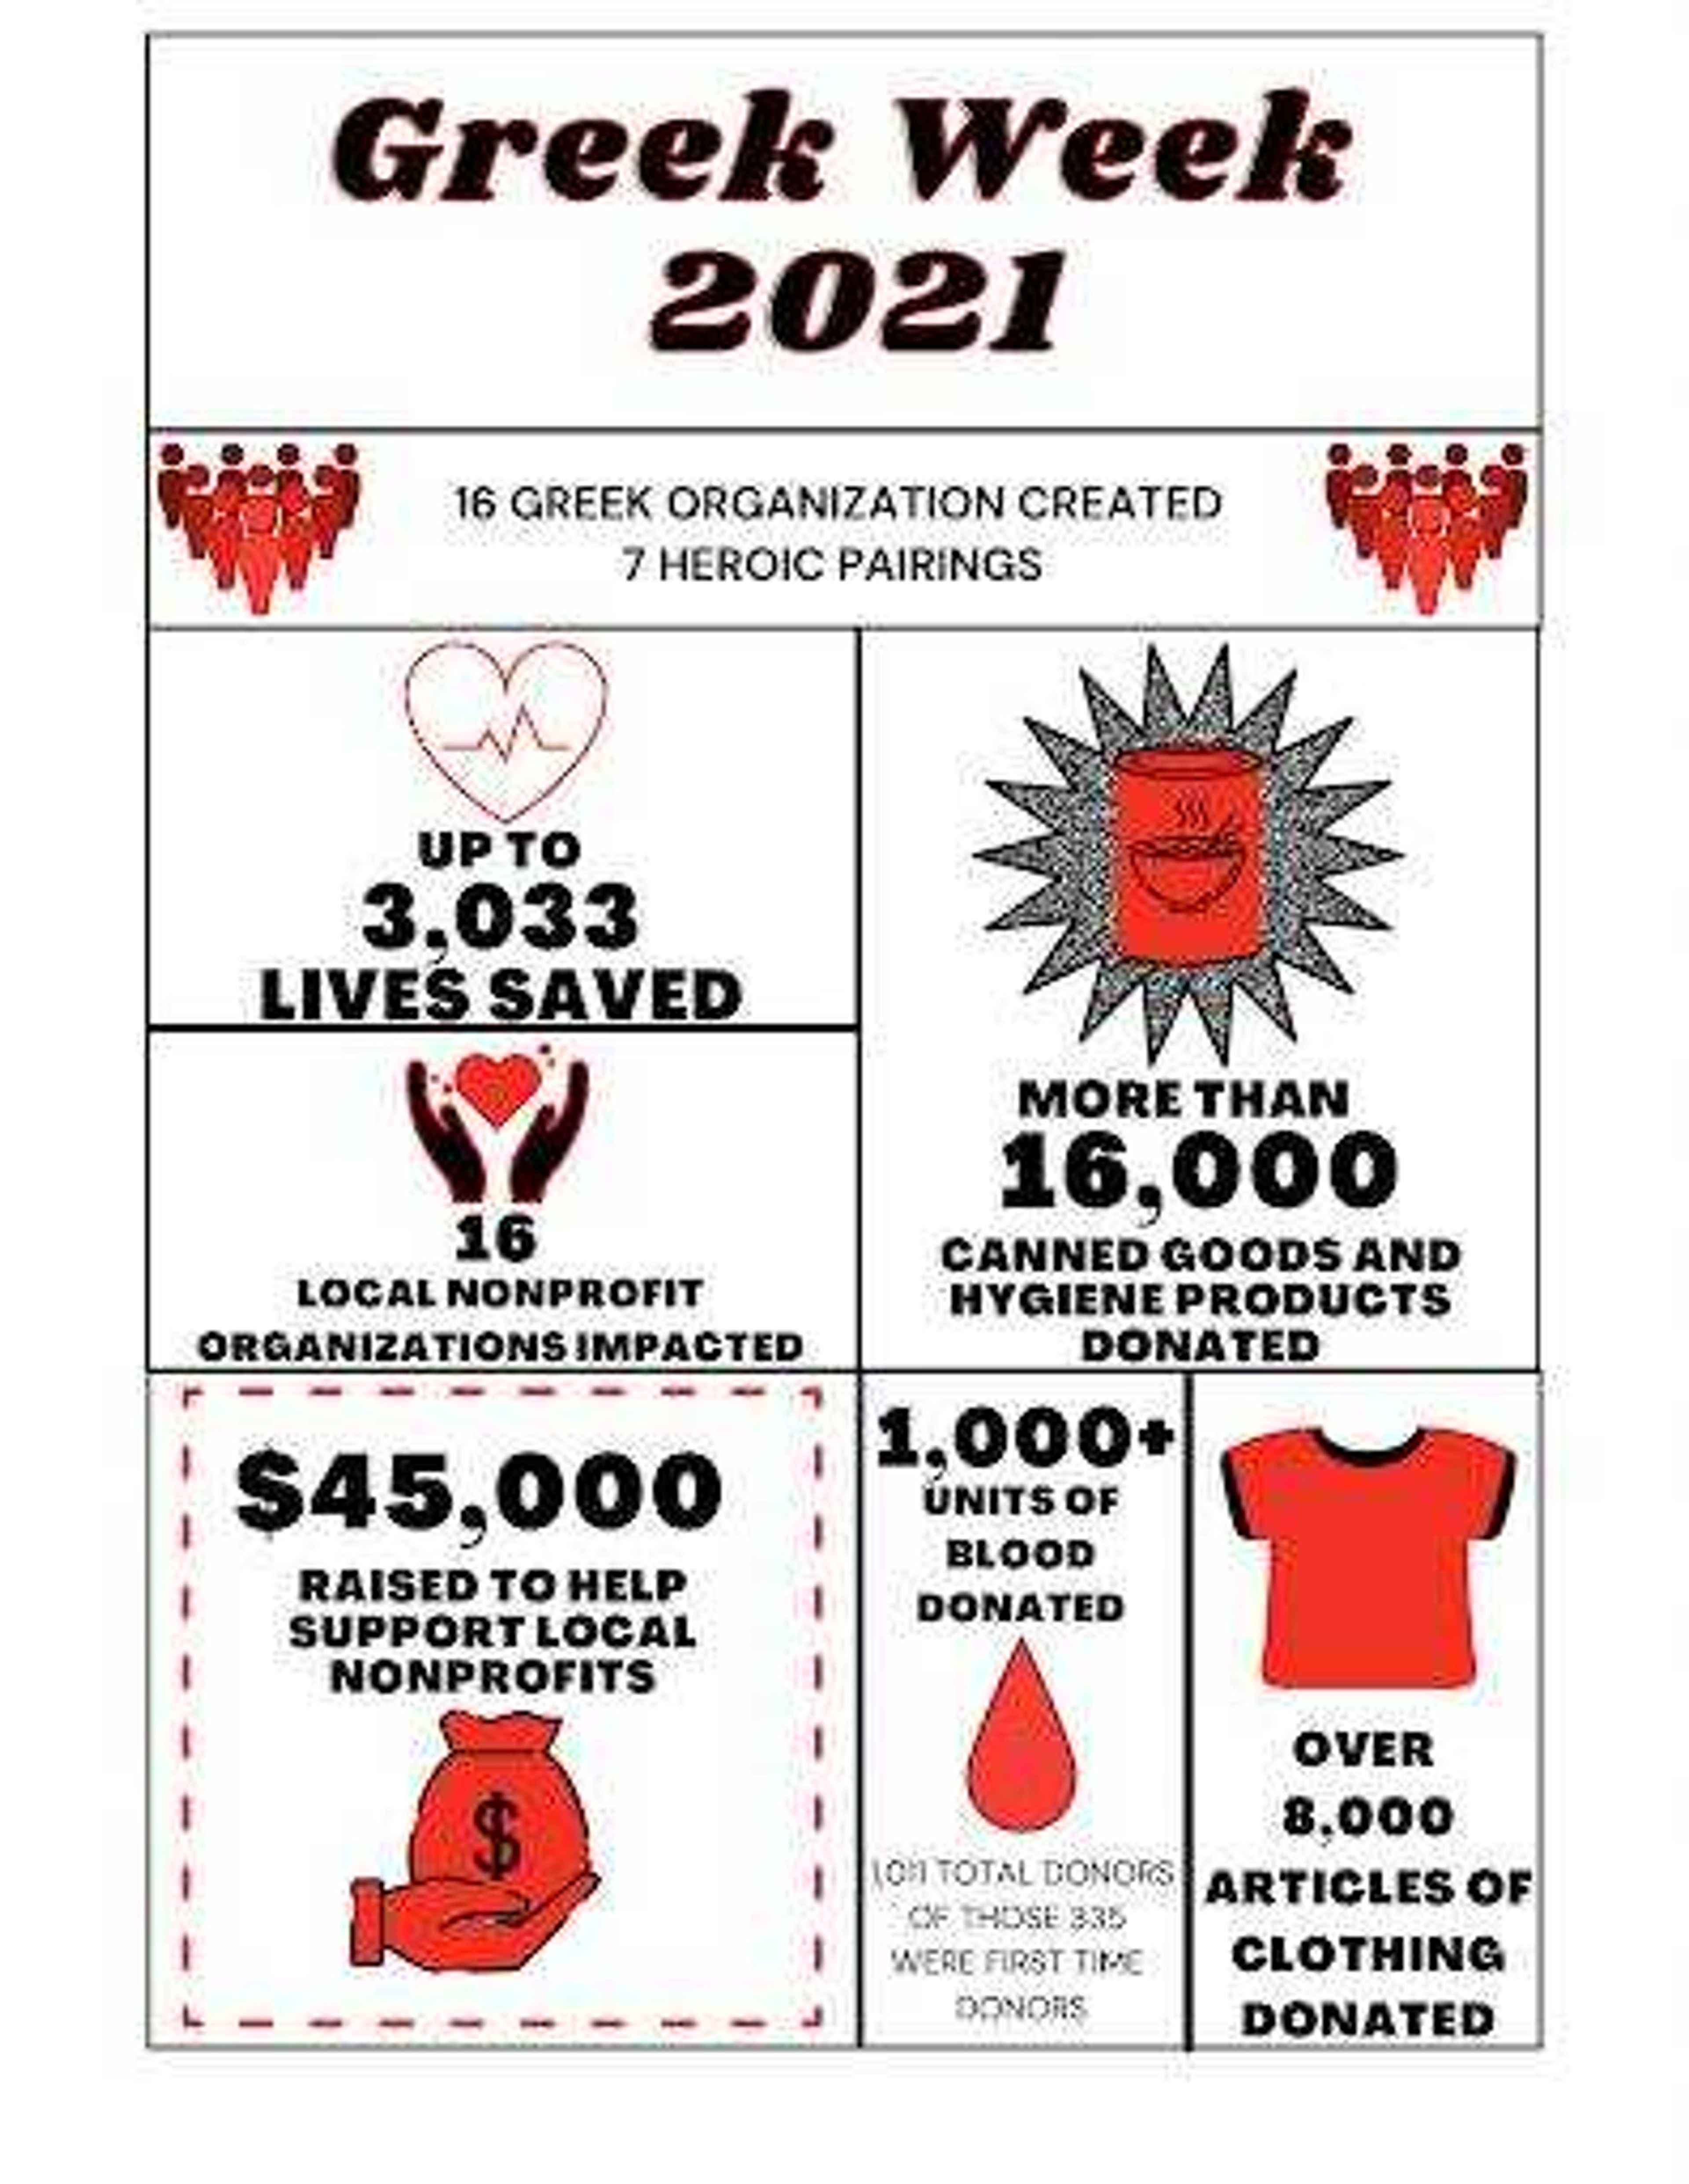 Graphics illustrate Greek Week accomplishments from 2019 and 2021. There is no data for Greek Week 2020 due to students being sent home because of the pandemic.